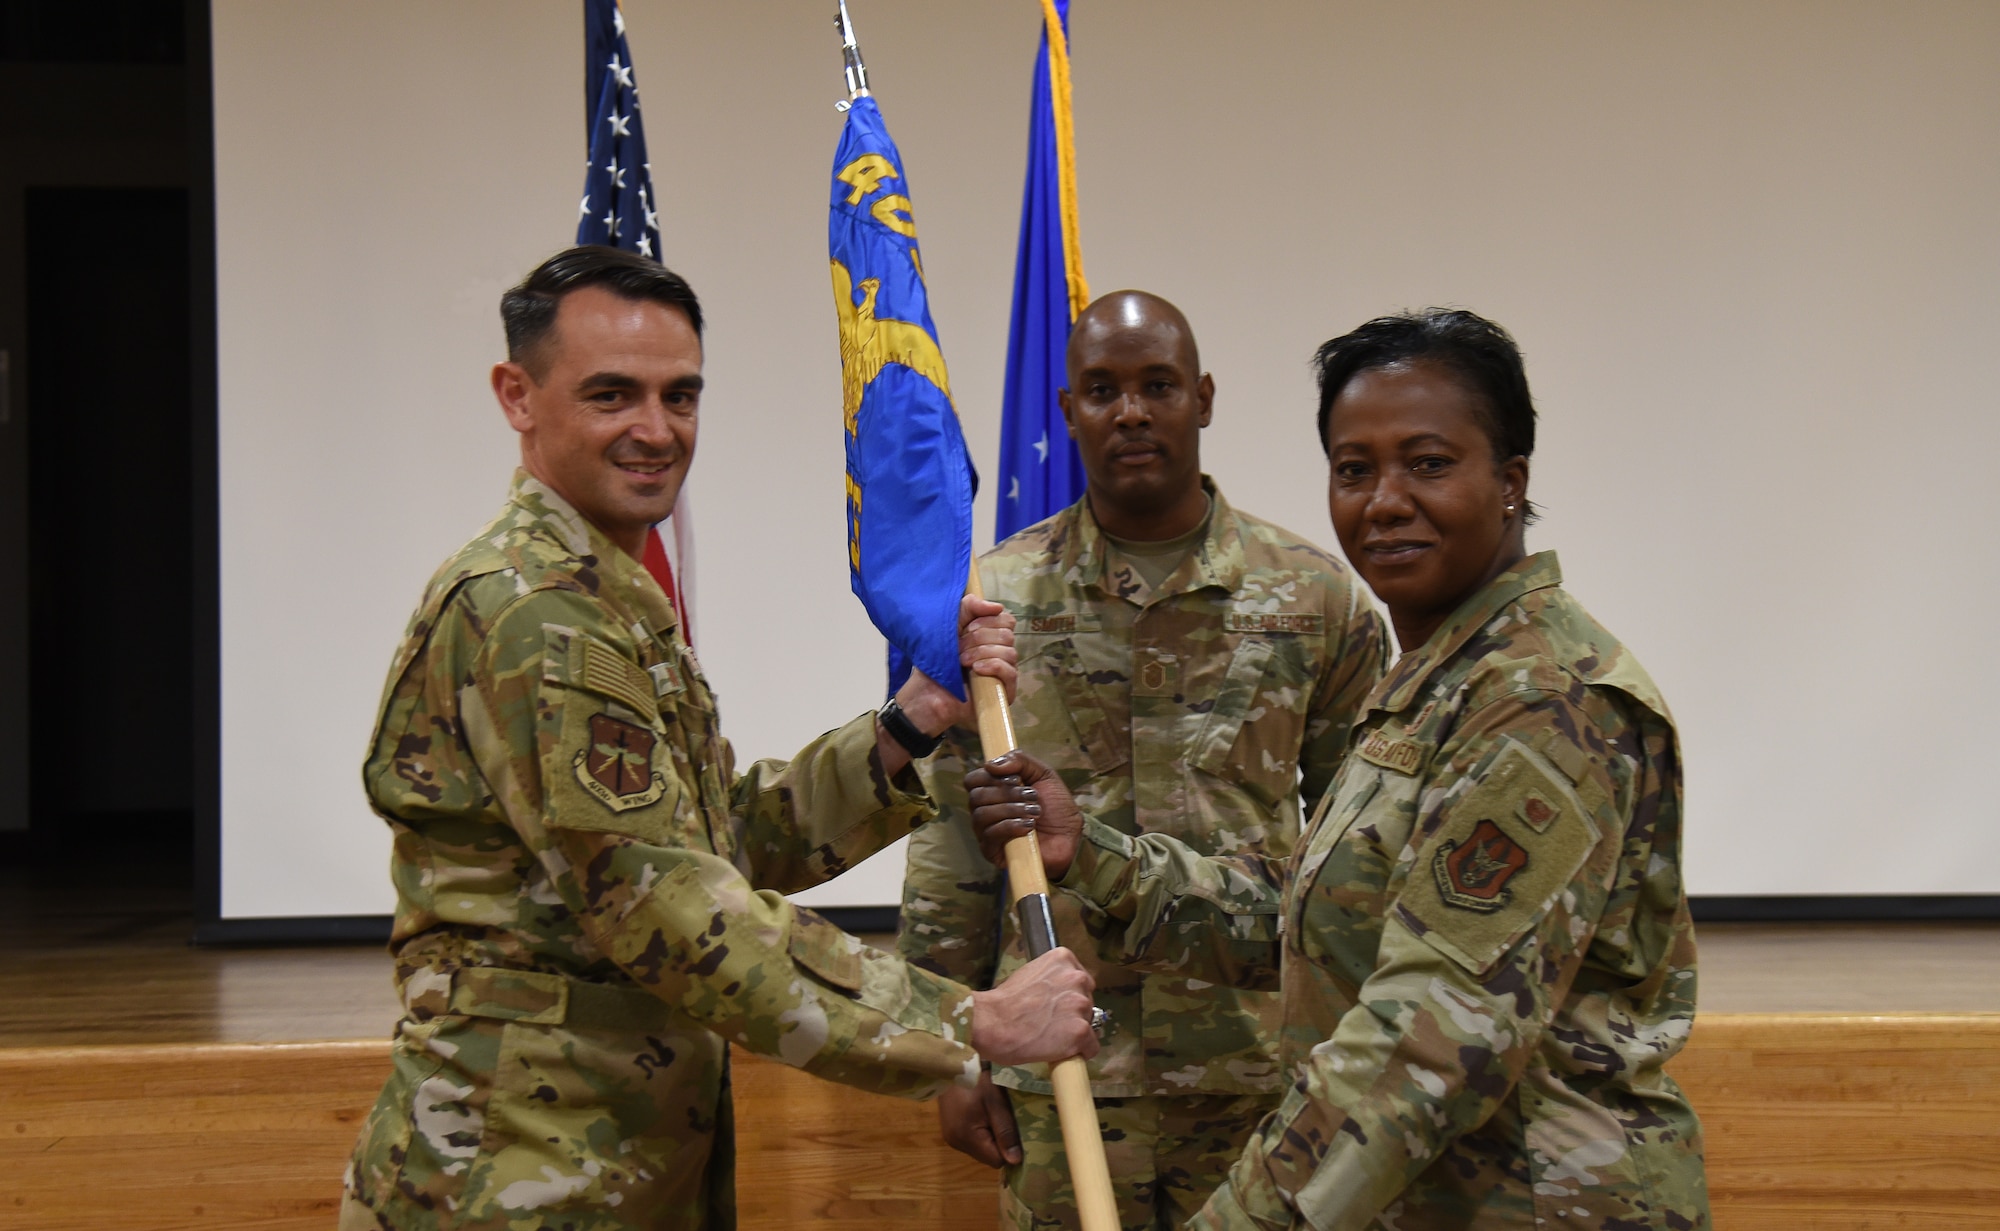 Col. Rubio and Col. Collier each hold onto the guidon flag. A third Airman is in the background